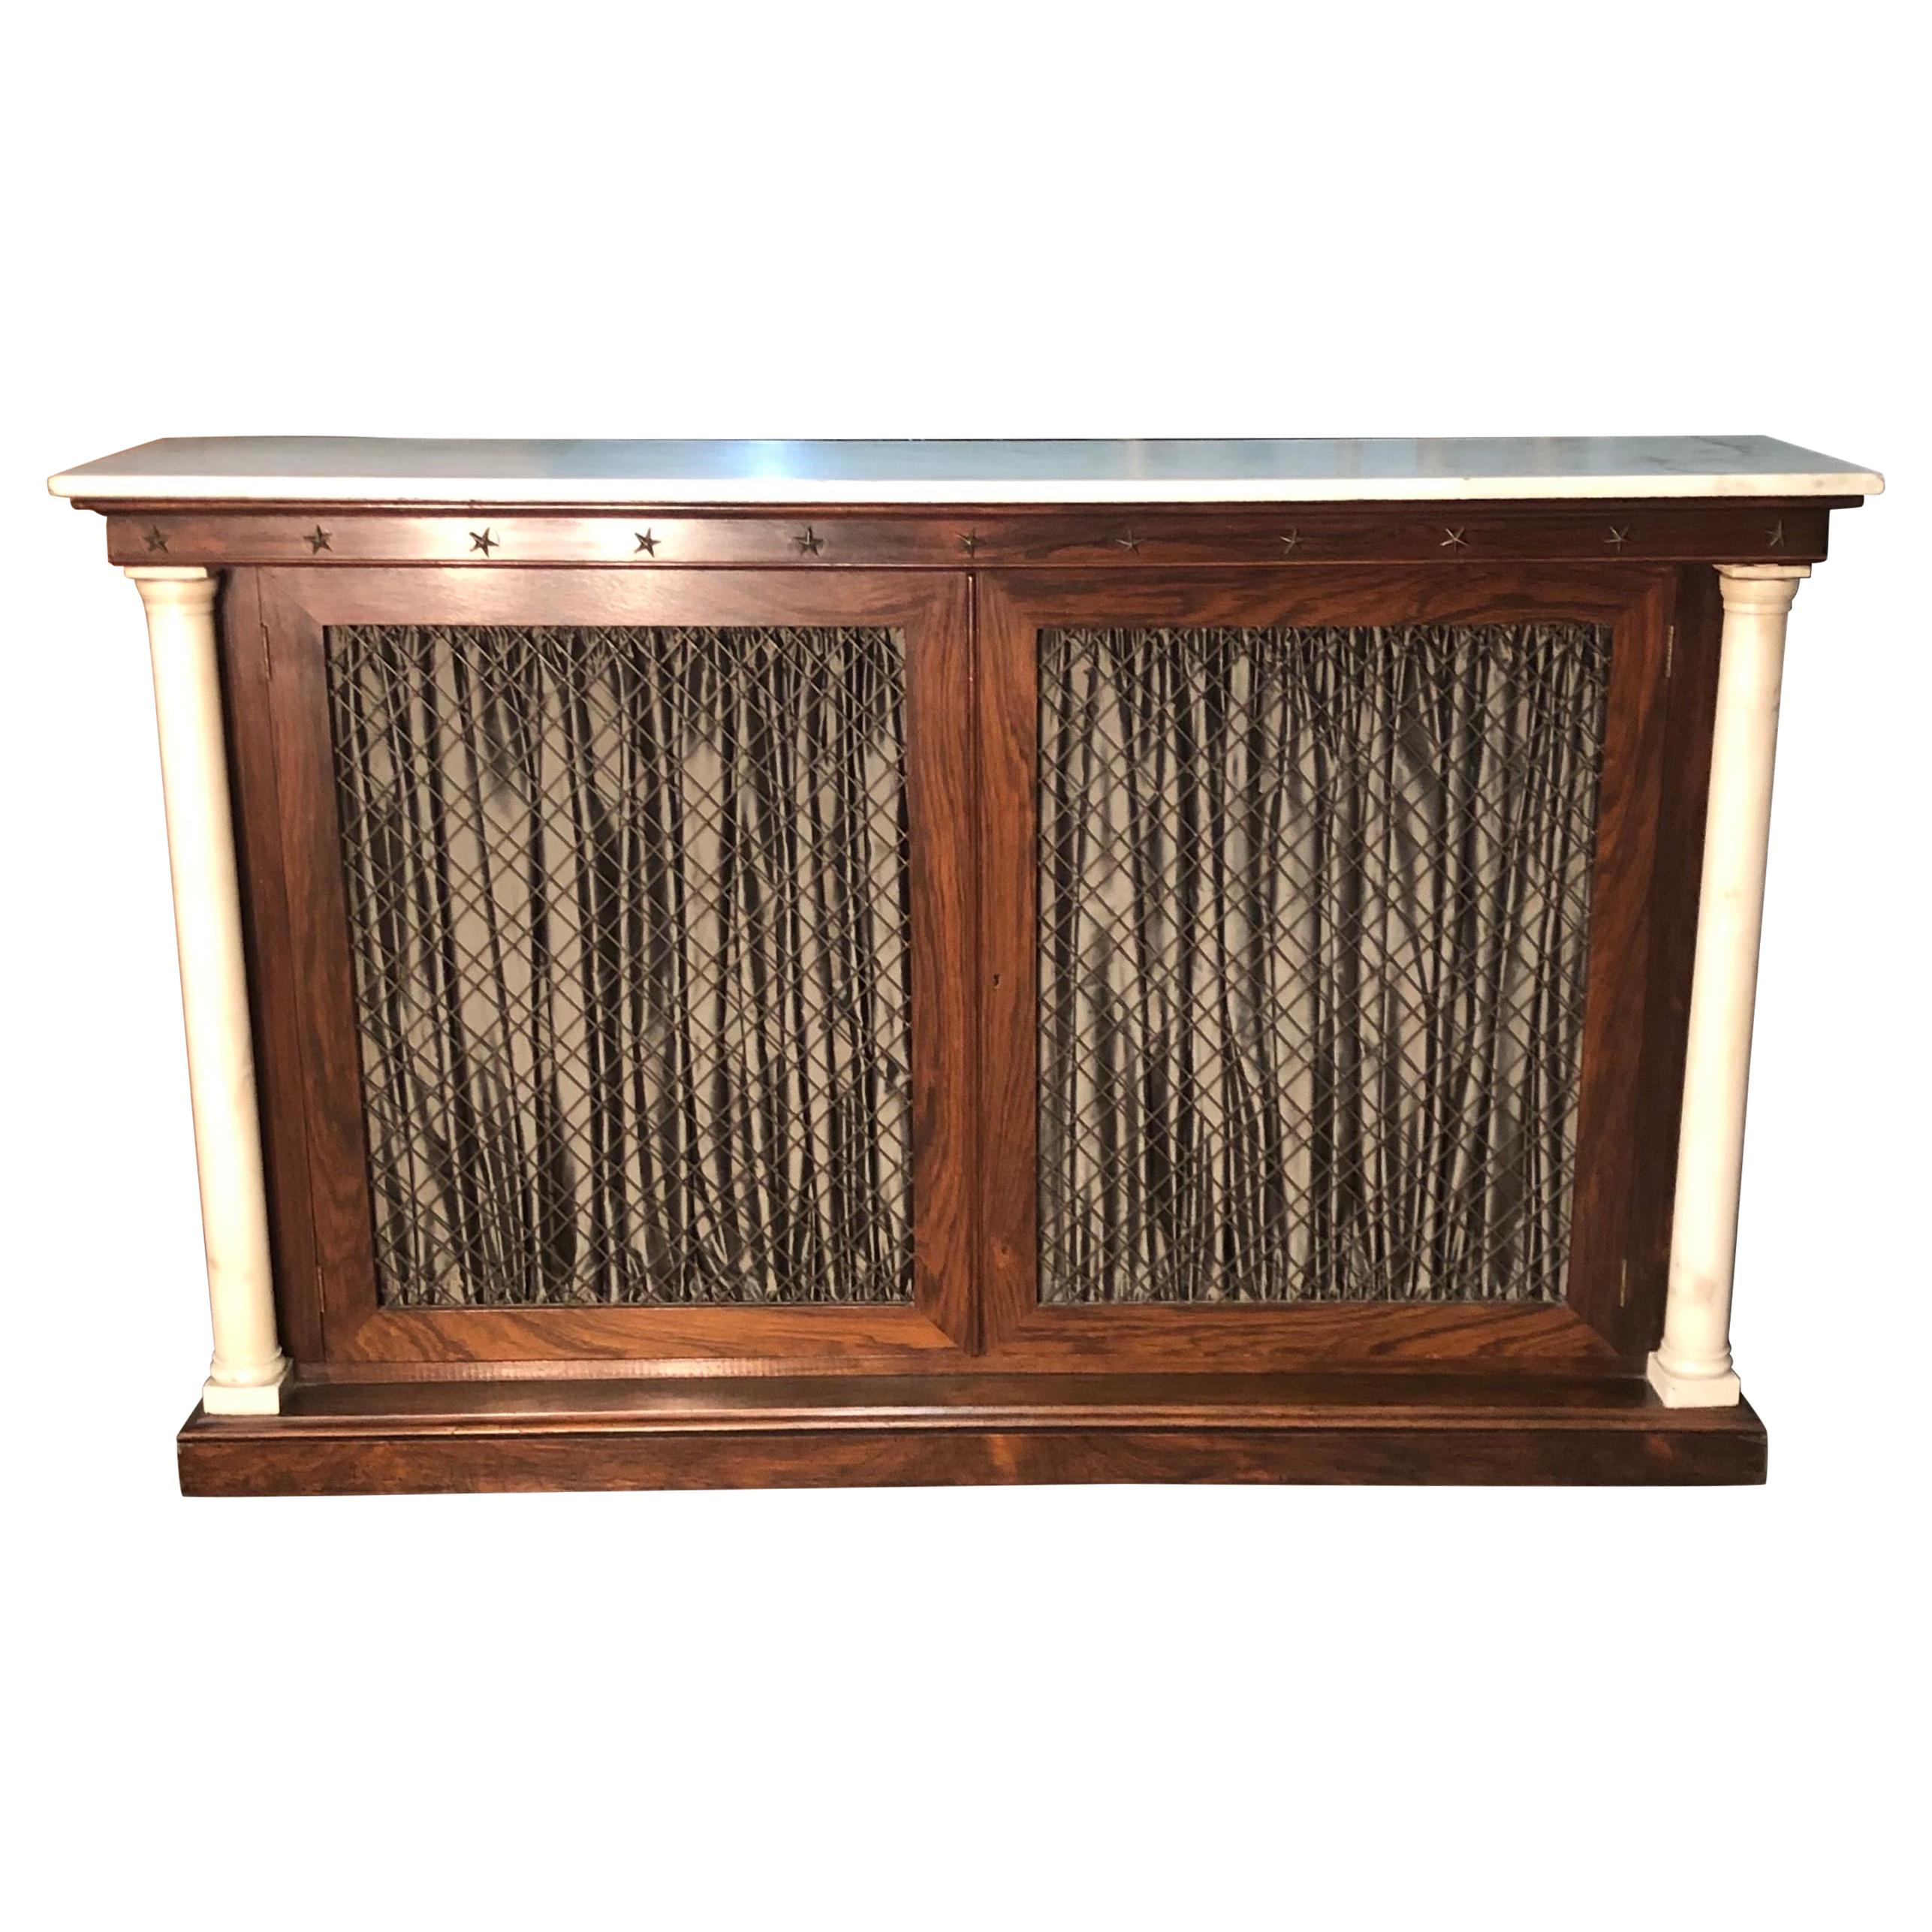 New York Marble Column Rosewood Bookcase / Credenza With Marble Top 19th Century For Sale